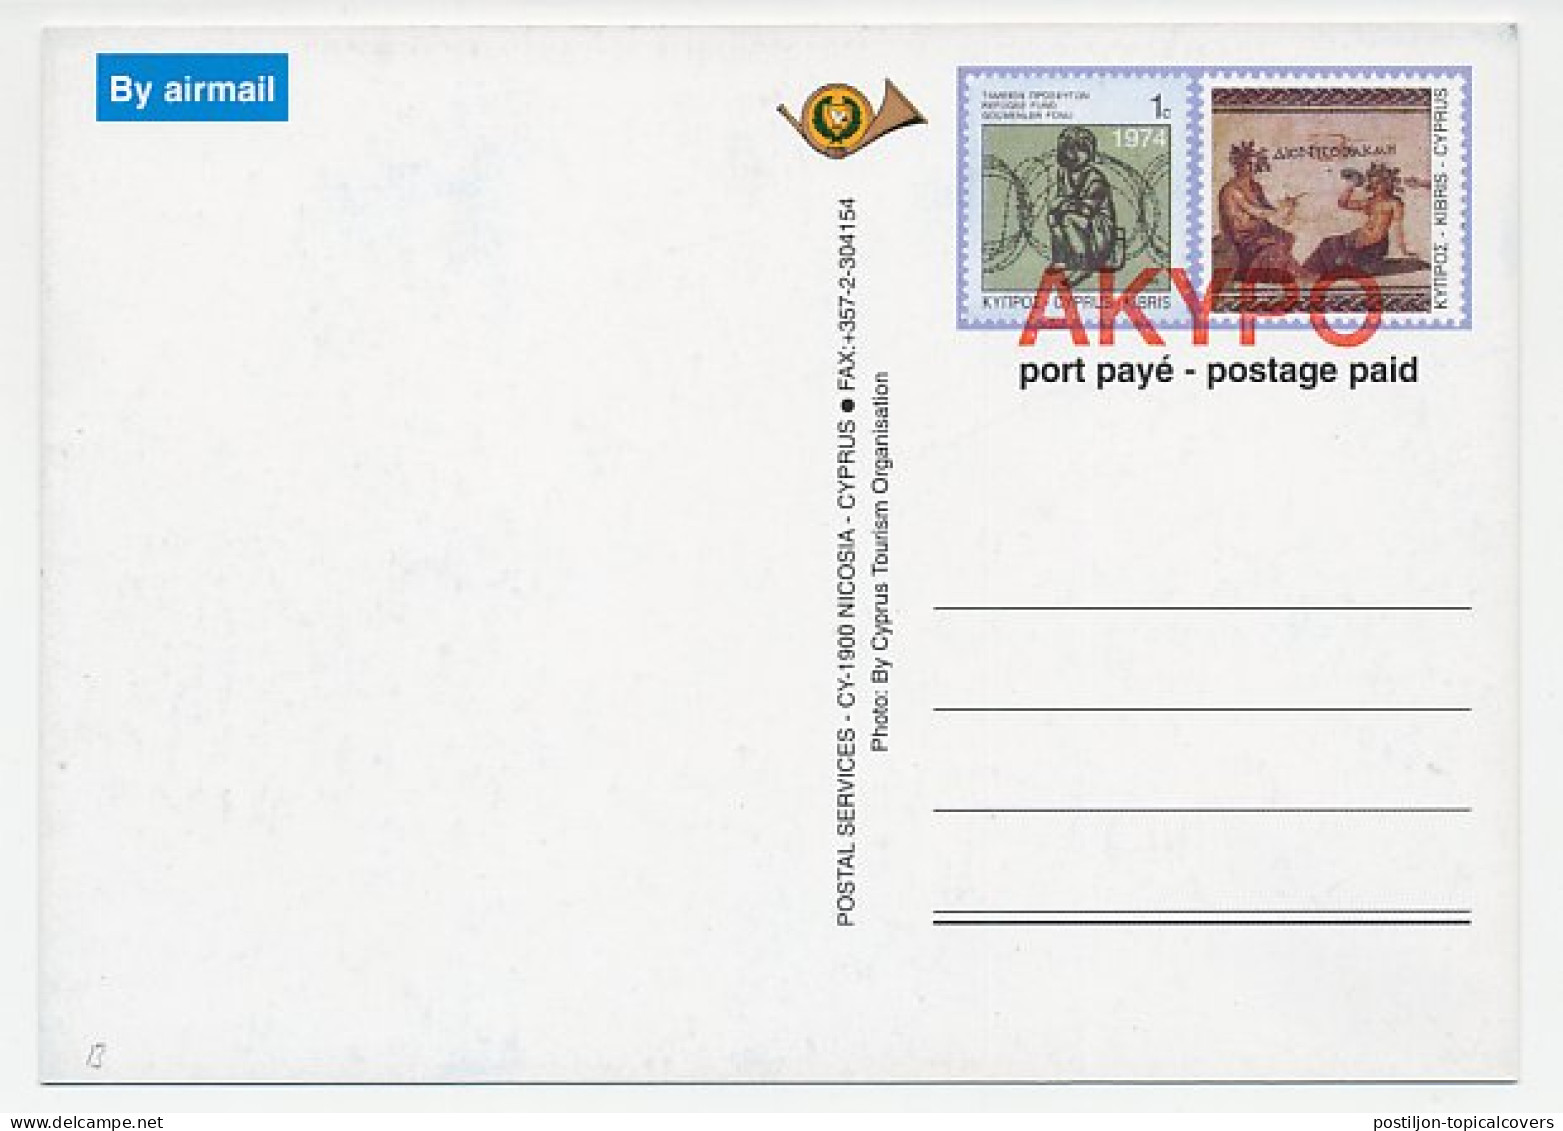 Invalid / Akypo - Postal Stationery Cyprus House Of Aion Pafos - Archaeology